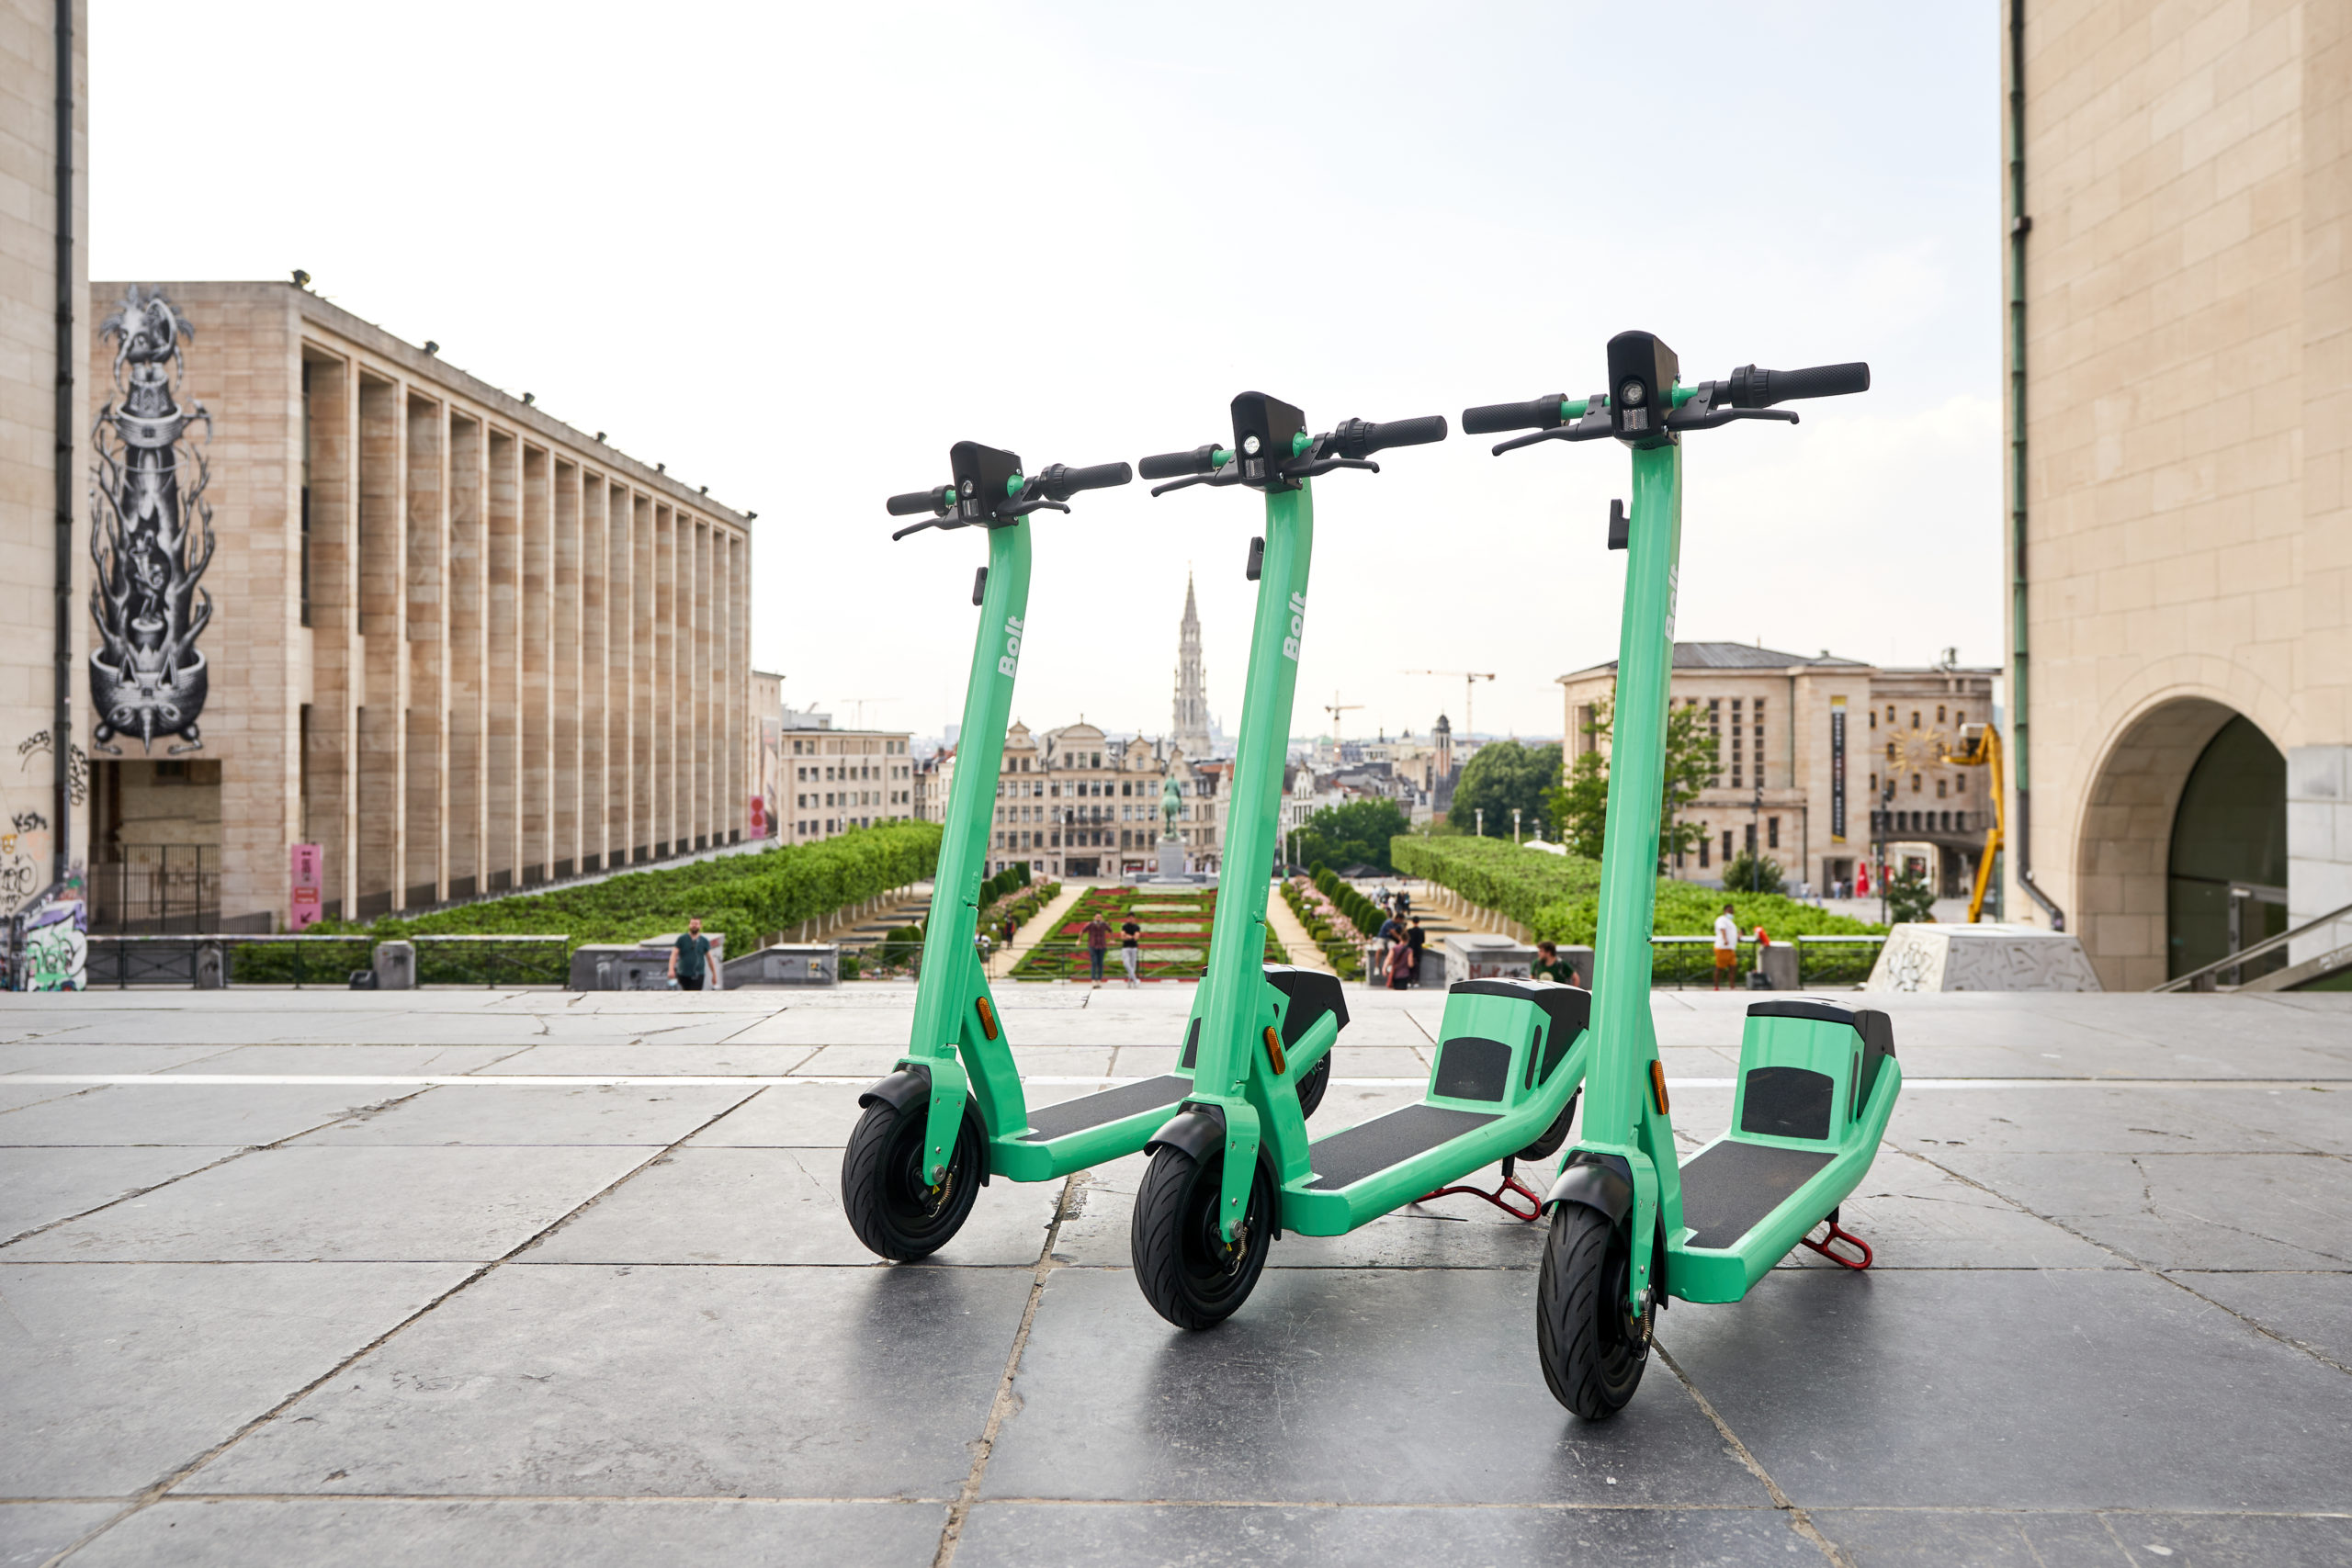 Bolt comes to Brussels with 1 100 e-scooters